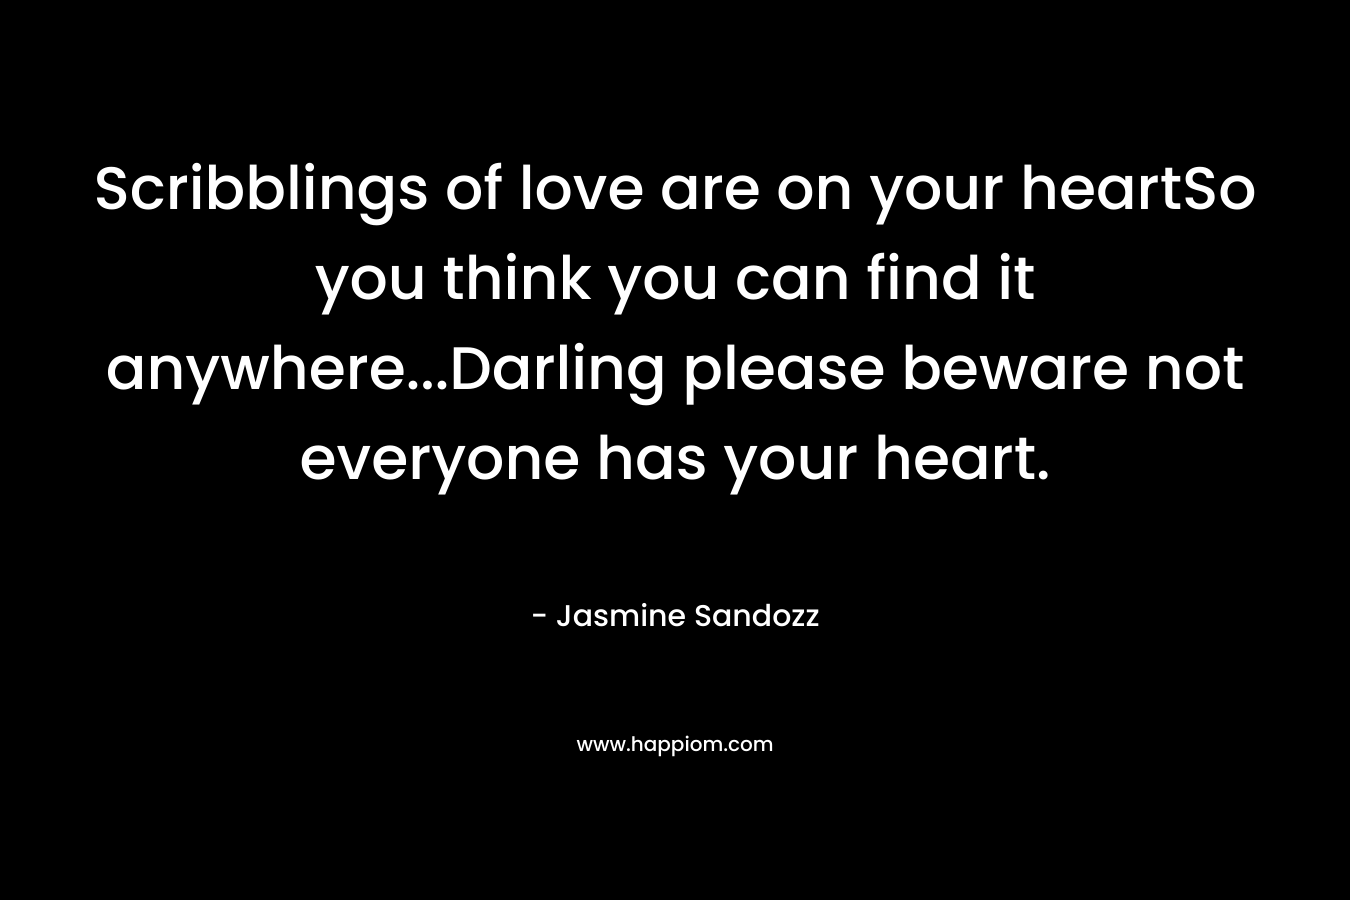 Scribblings of love are on your heartSo you think you can find it anywhere...Darling please beware not everyone has your heart.